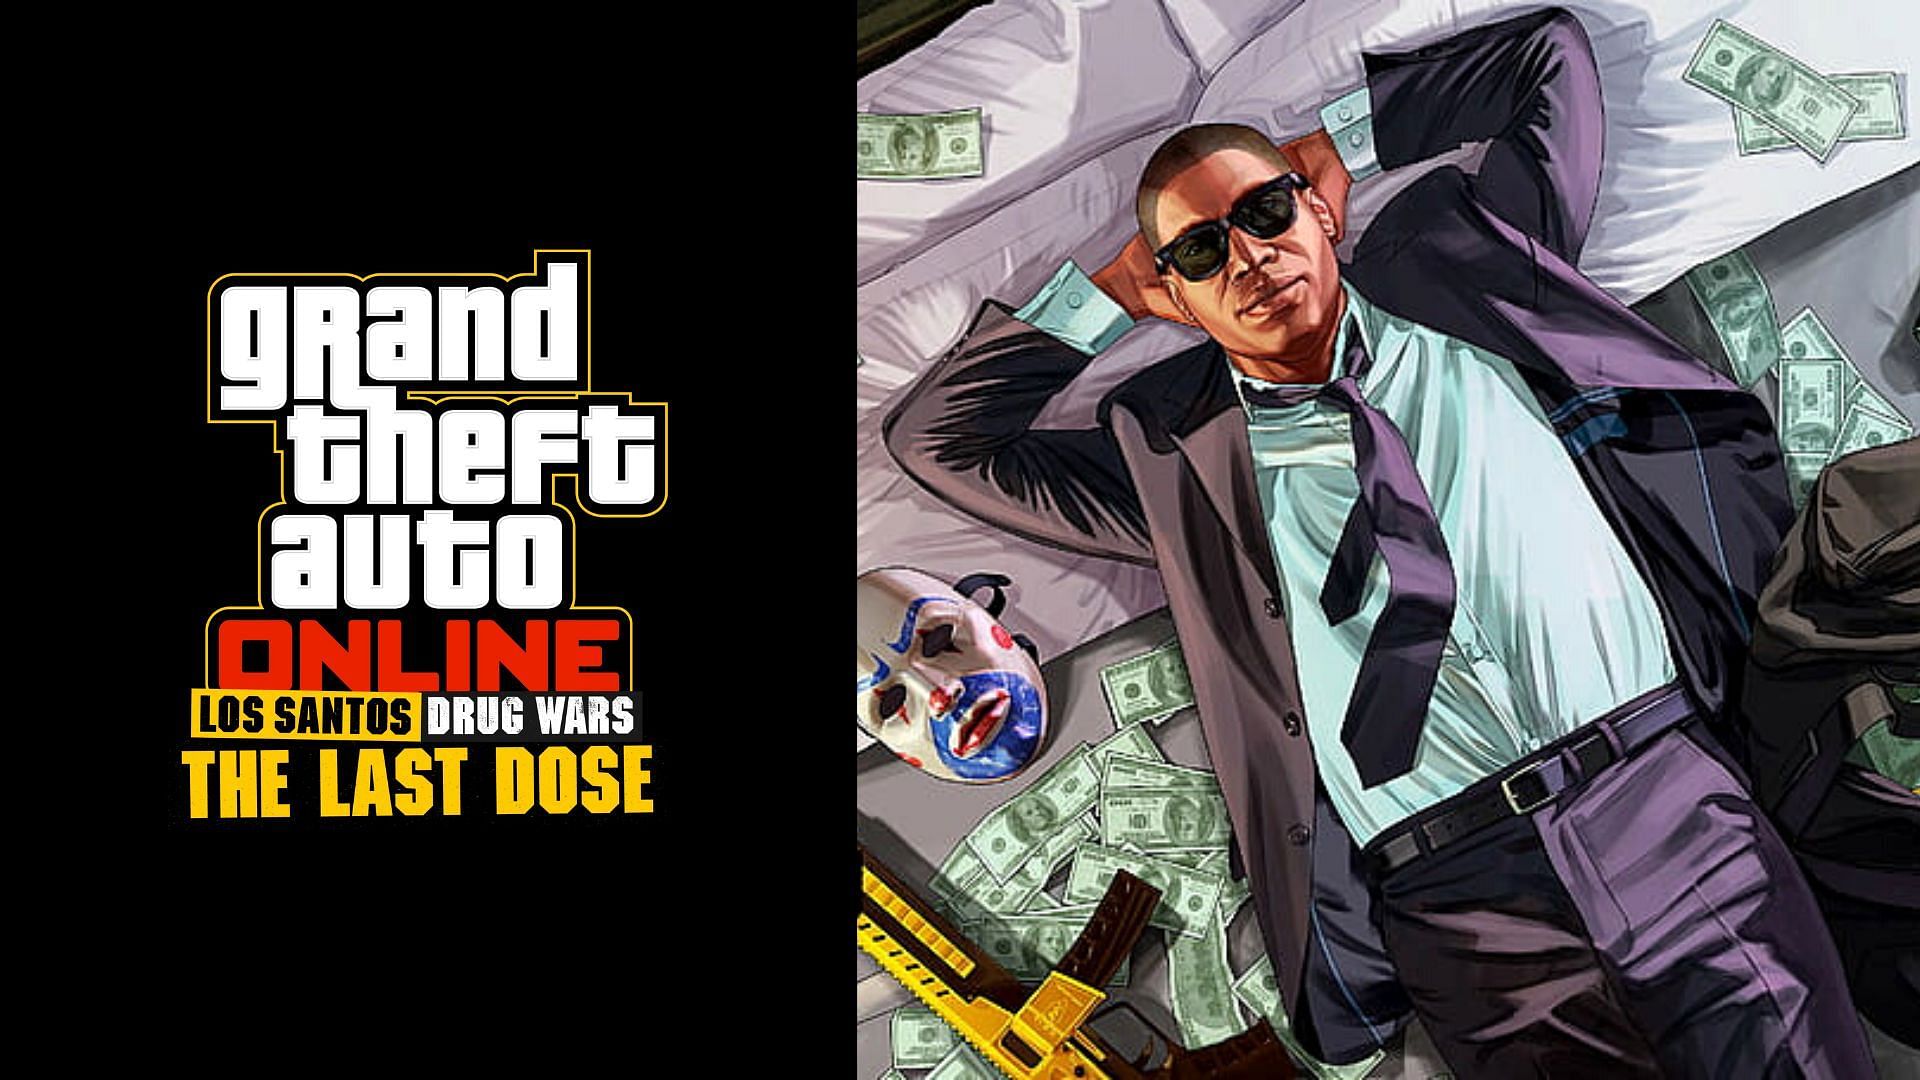 A brief guide to earn $1,000,000 money in GTA Online easily after The Last Dose update (Image via Rockstar Games)